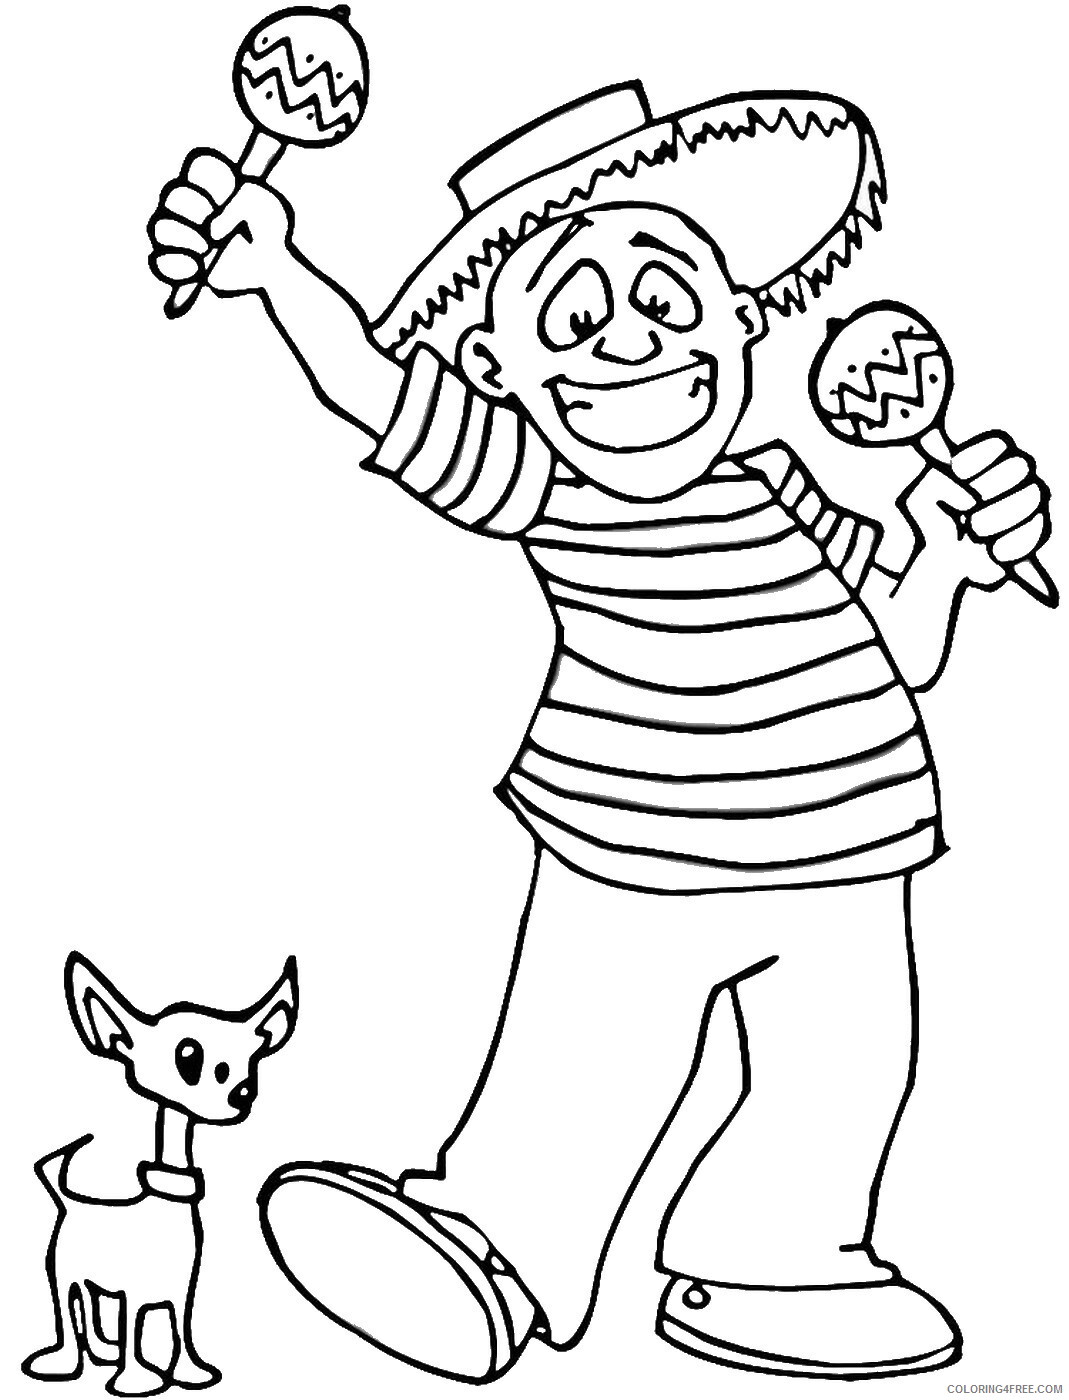 Around the World Coloring Pages around_world_86 Printable 2021 0309 Coloring4free